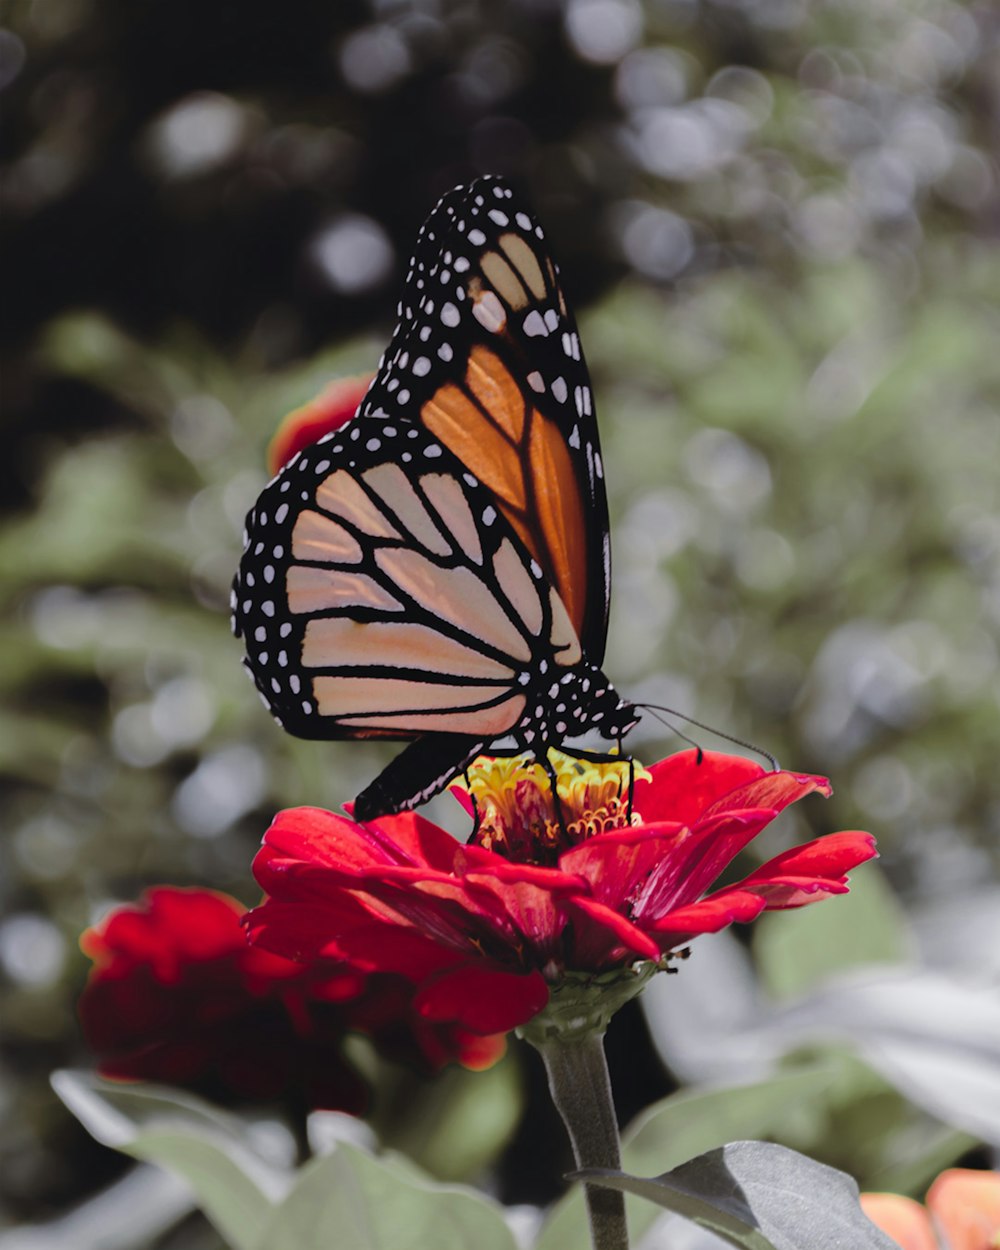 monarch butterfly perched on red flower in close up photography during  daytime photo – Free South america Image on Unsplash